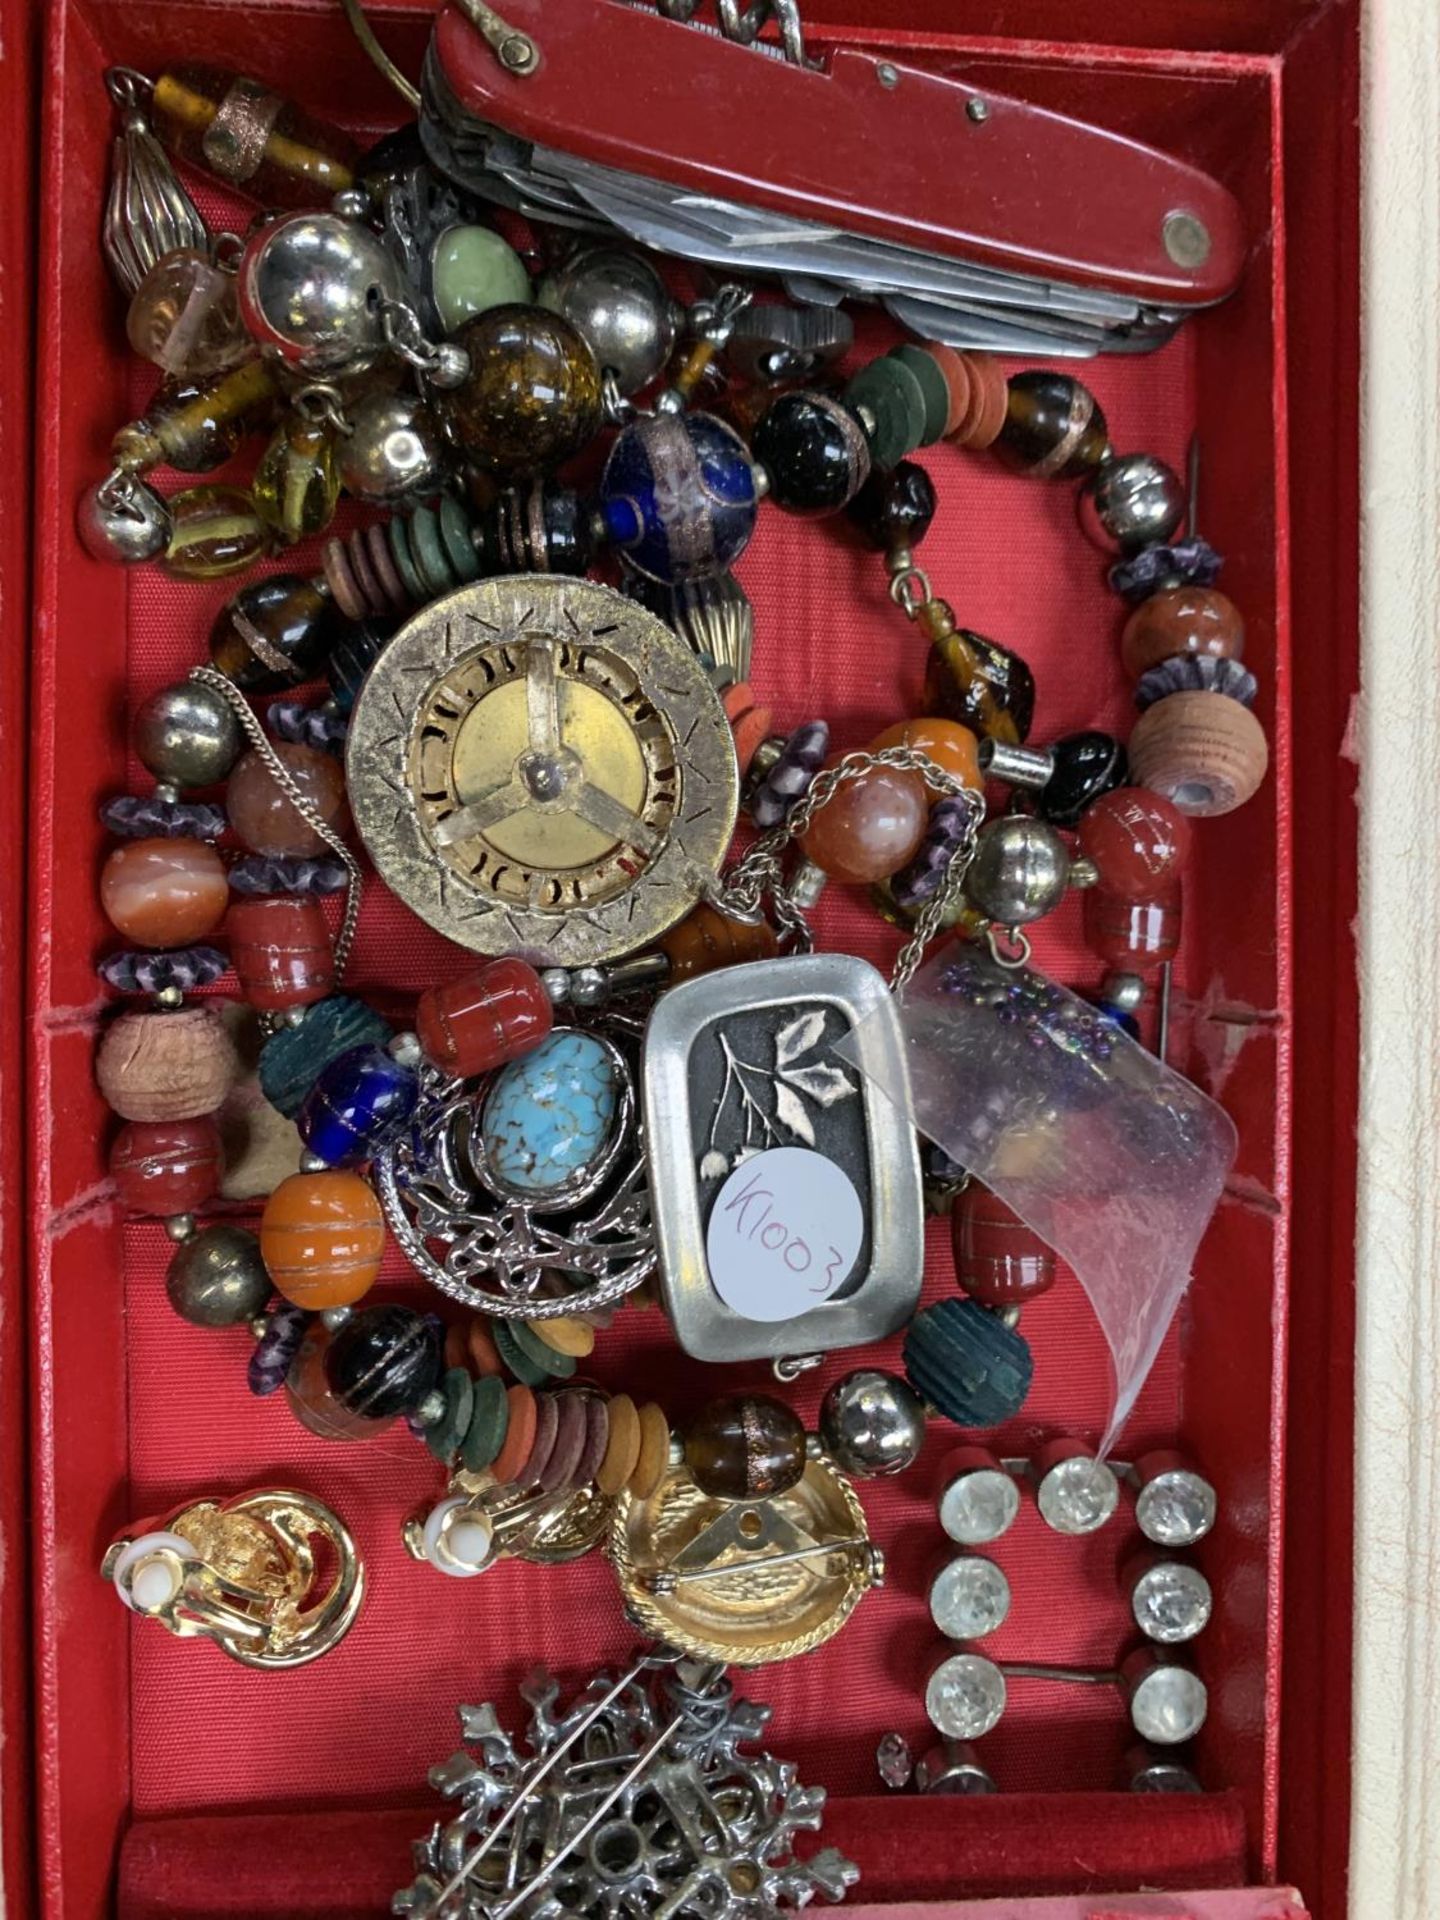 A BOX CONAINING VARIOUS COSTUME JEWELLERY ITEMS SUCH AS BROOCH, BRACELETS ETC - Image 2 of 2